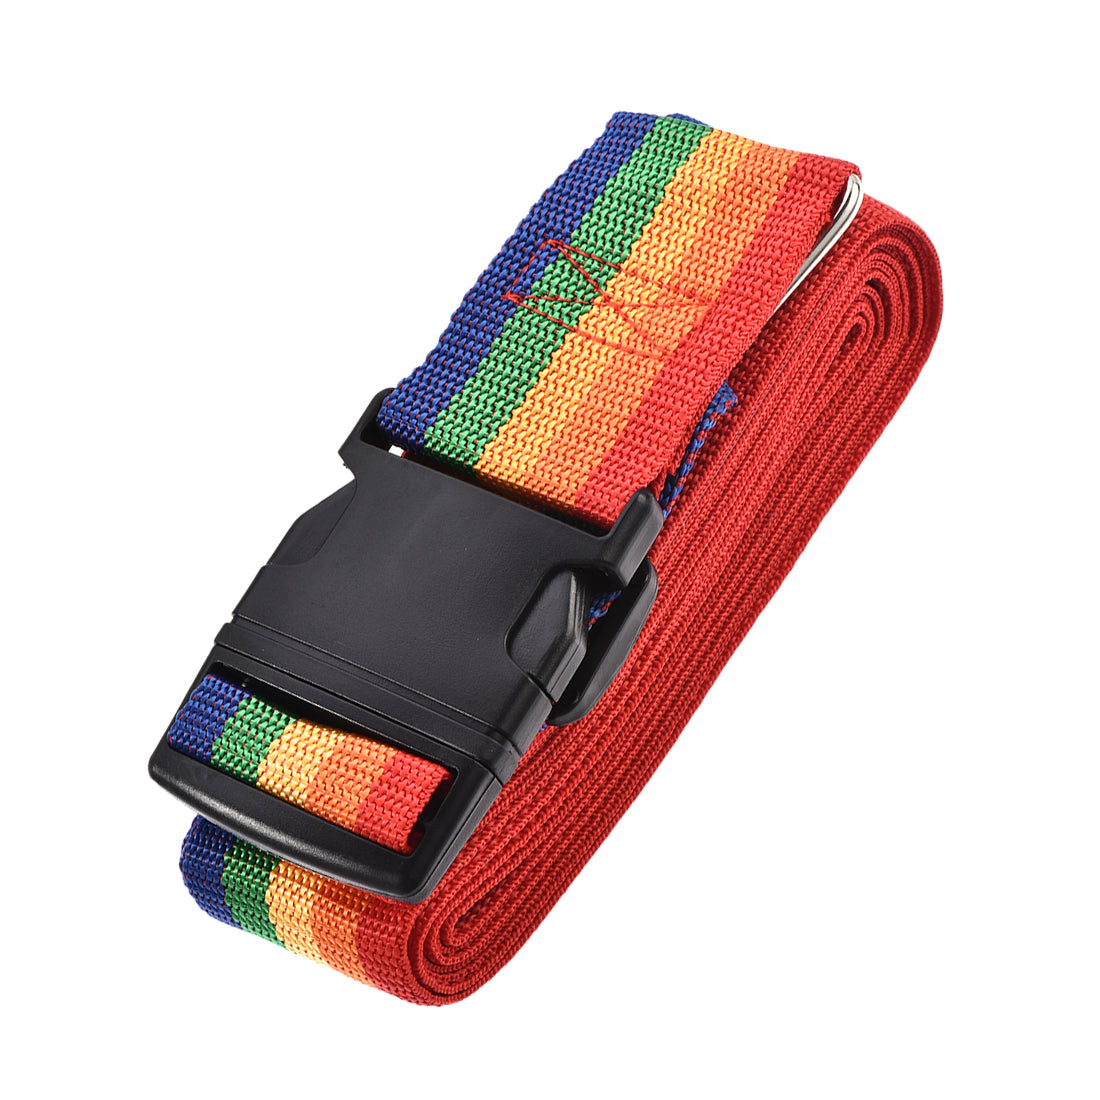 uxcell Uxcell Luggage Strap Suitcase Belt with Buckle, 4Mx5cm Cross Adjustable PP Travel Packing Accessory, Multi Color (Red Orange Yellow Green Blue)